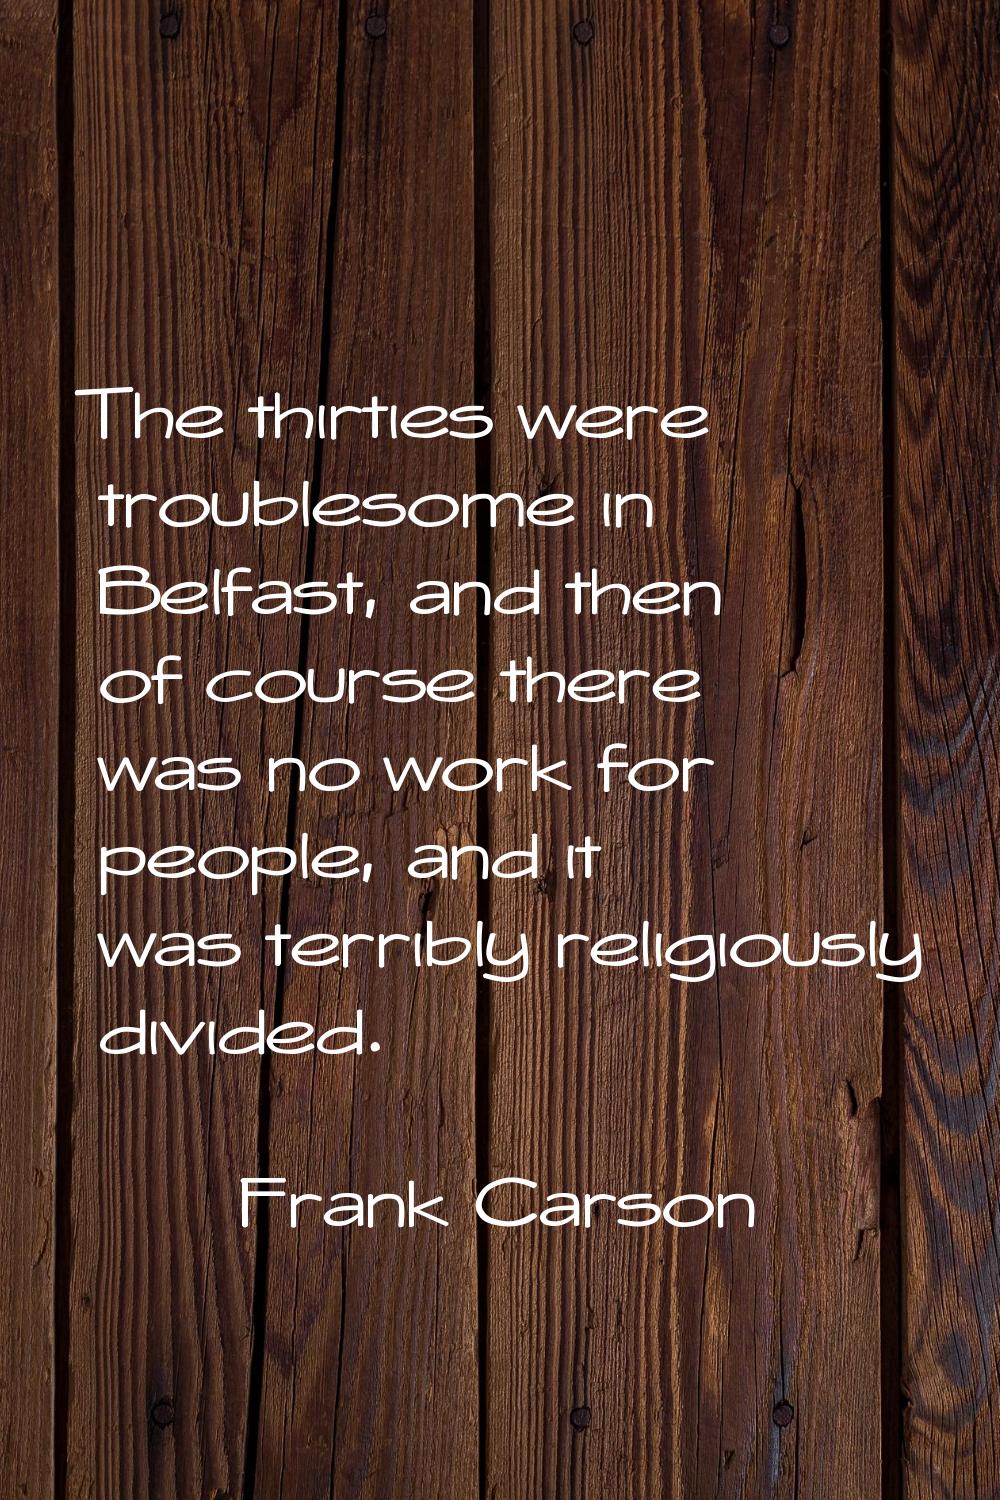 The thirties were troublesome in Belfast, and then of course there was no work for people, and it w